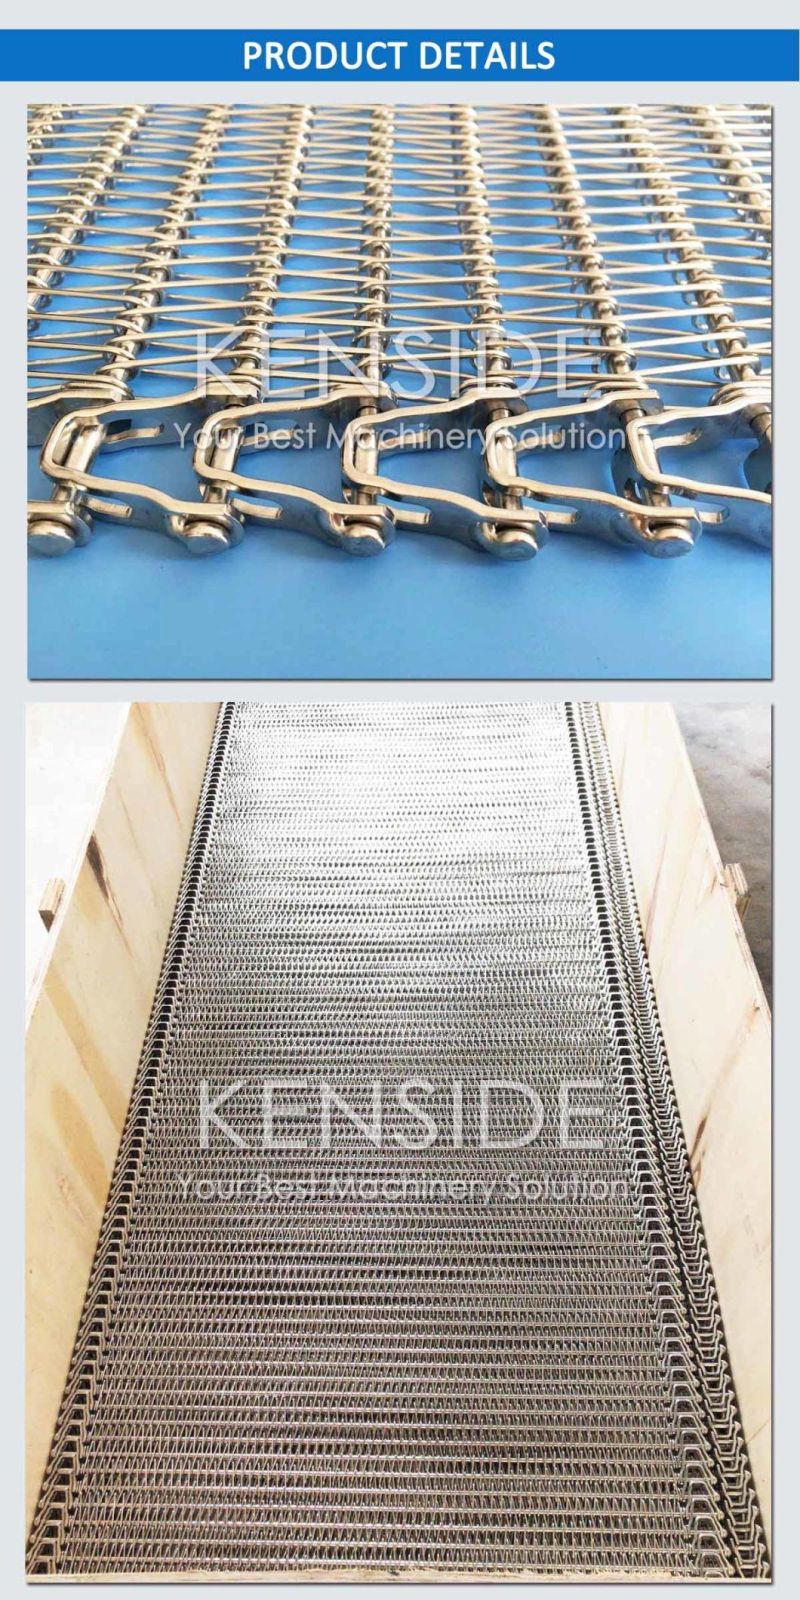 Stainless Steel Belting Spiral Conveyor Belts Reduced Radius Belts for Bakery Cooling Lines